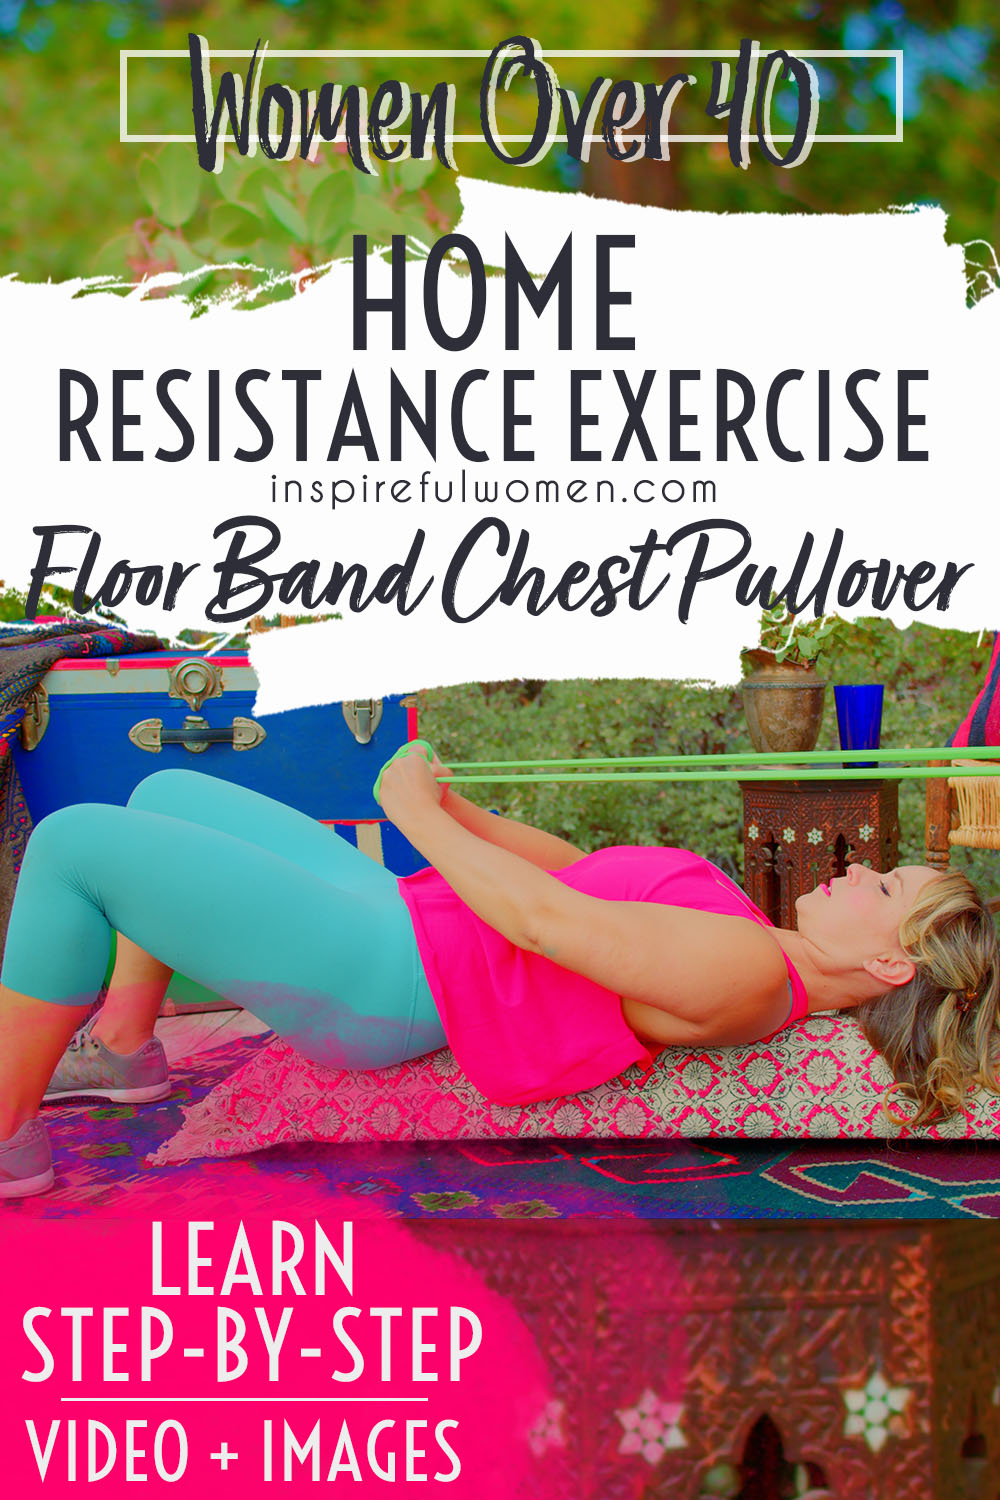 floor-resistance-band-chest-pullover-foam-roller-pectoralis-lats-triceps-workout-women-40+